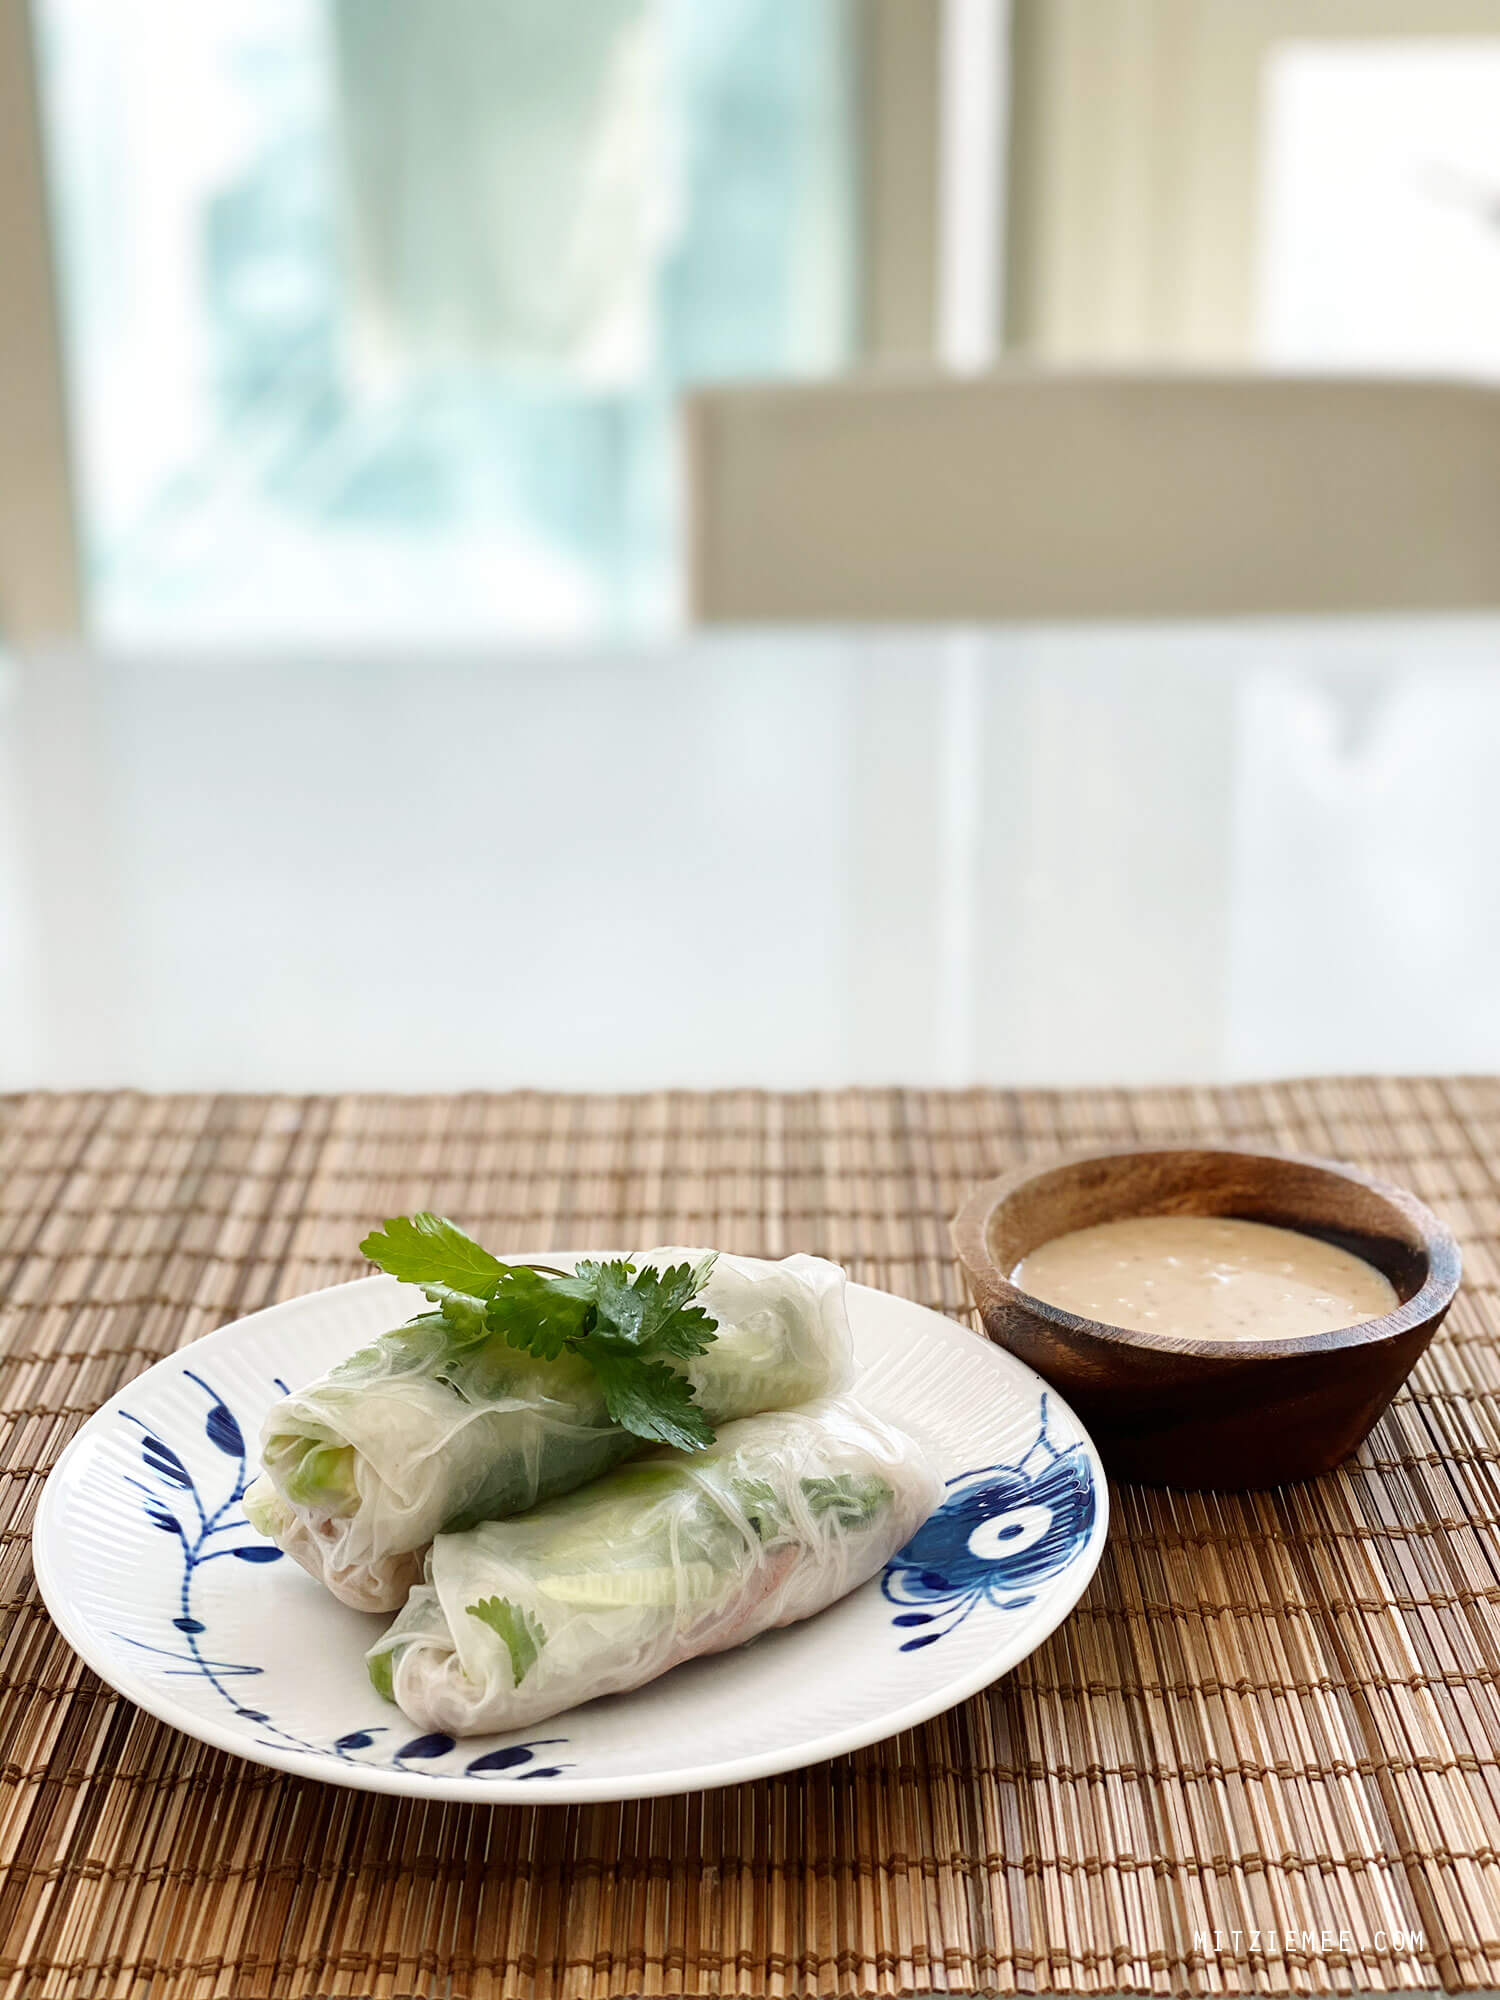 Rice paper rolls with roast duck and avocado